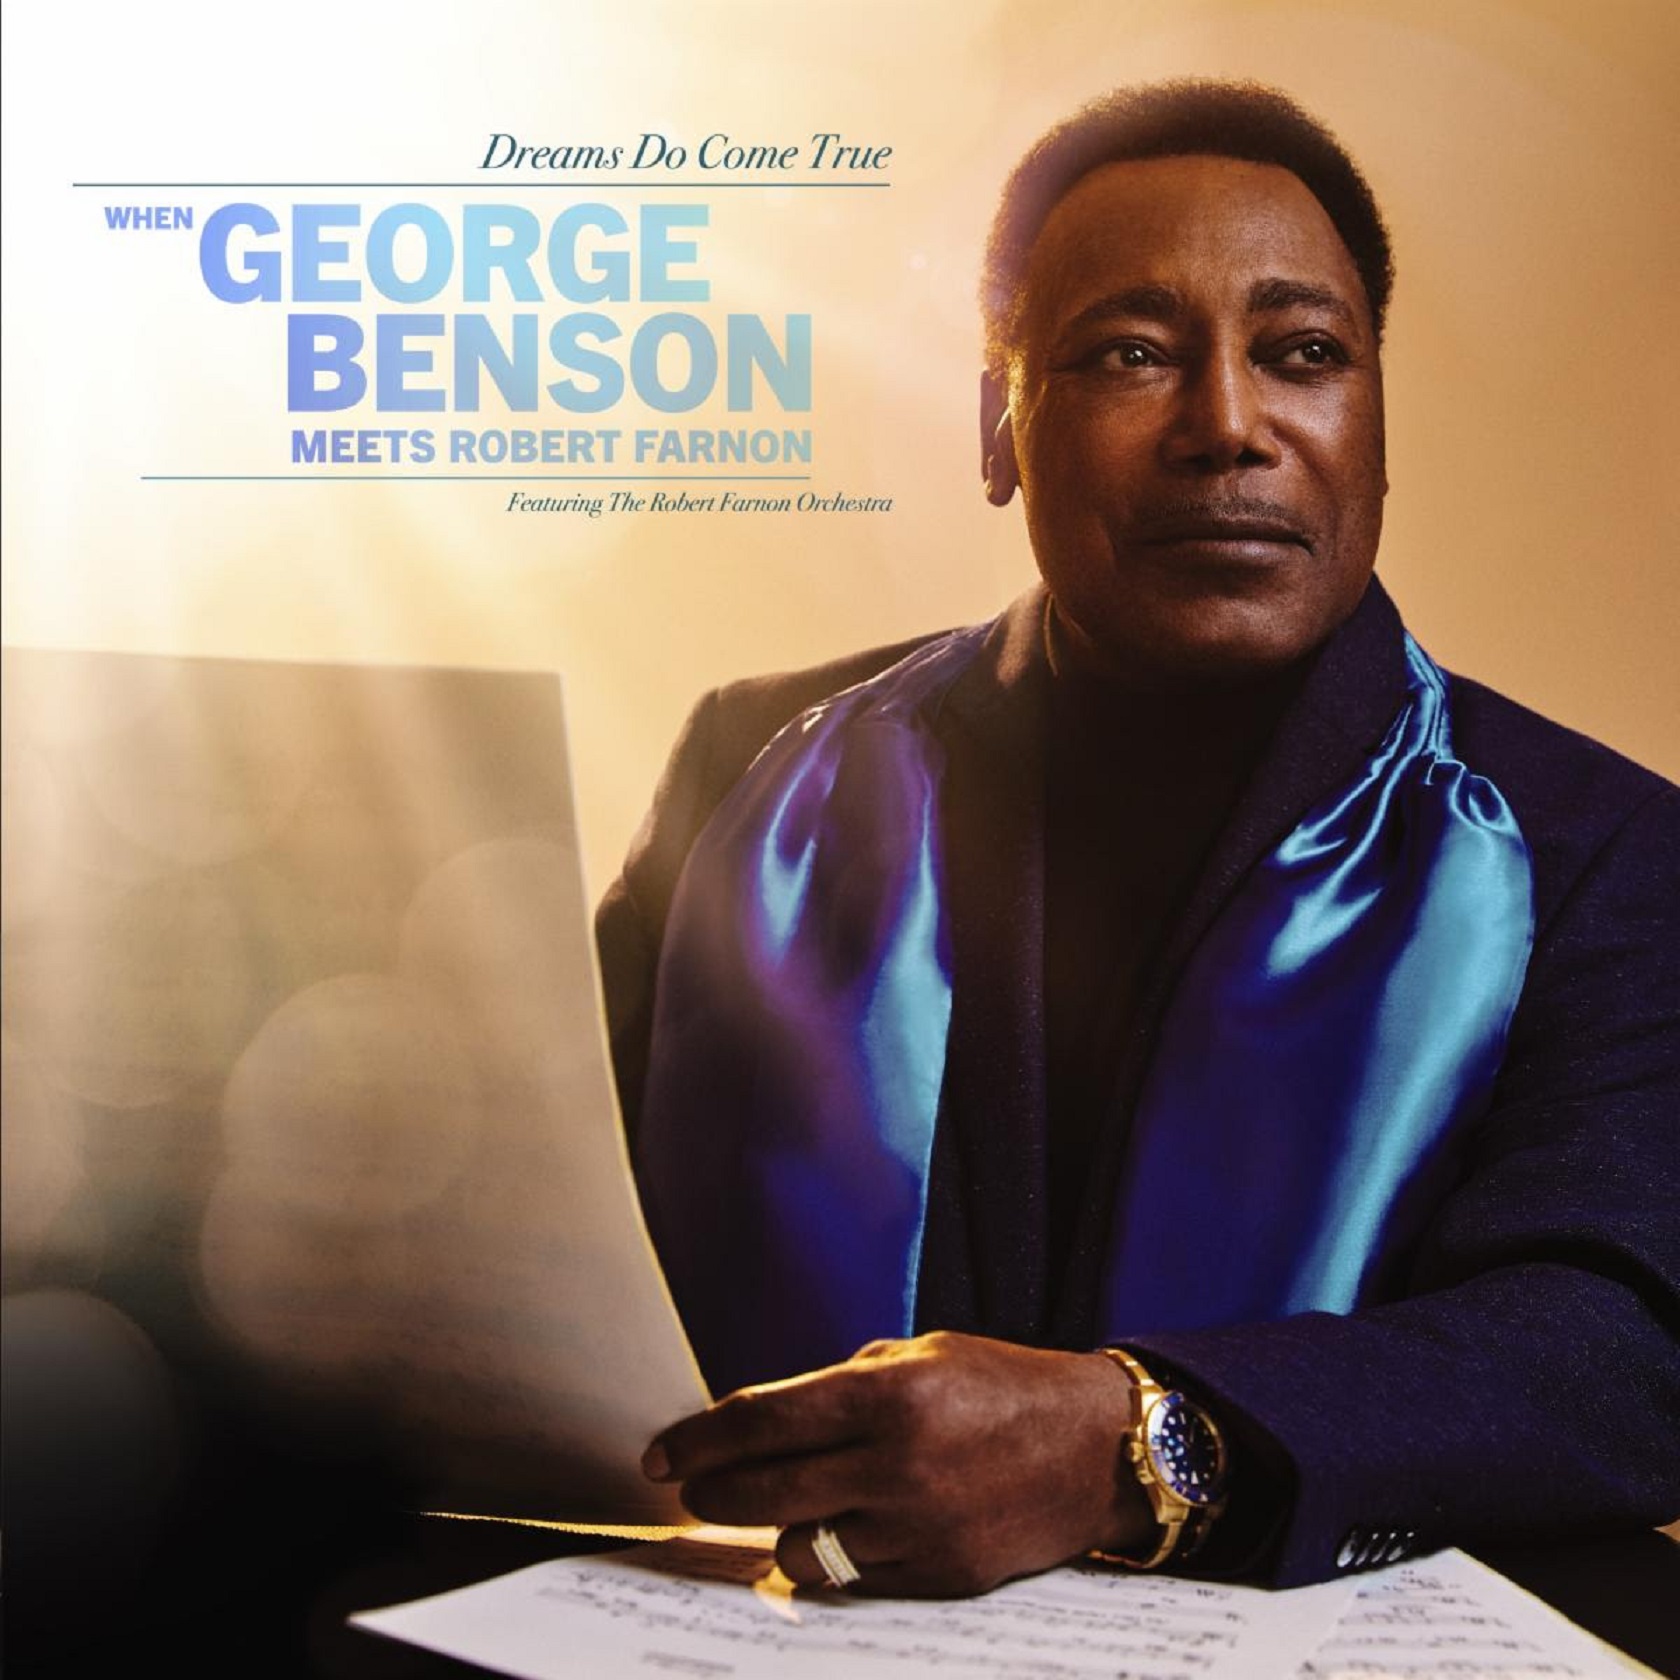 George Benson delivers "A Song For You"